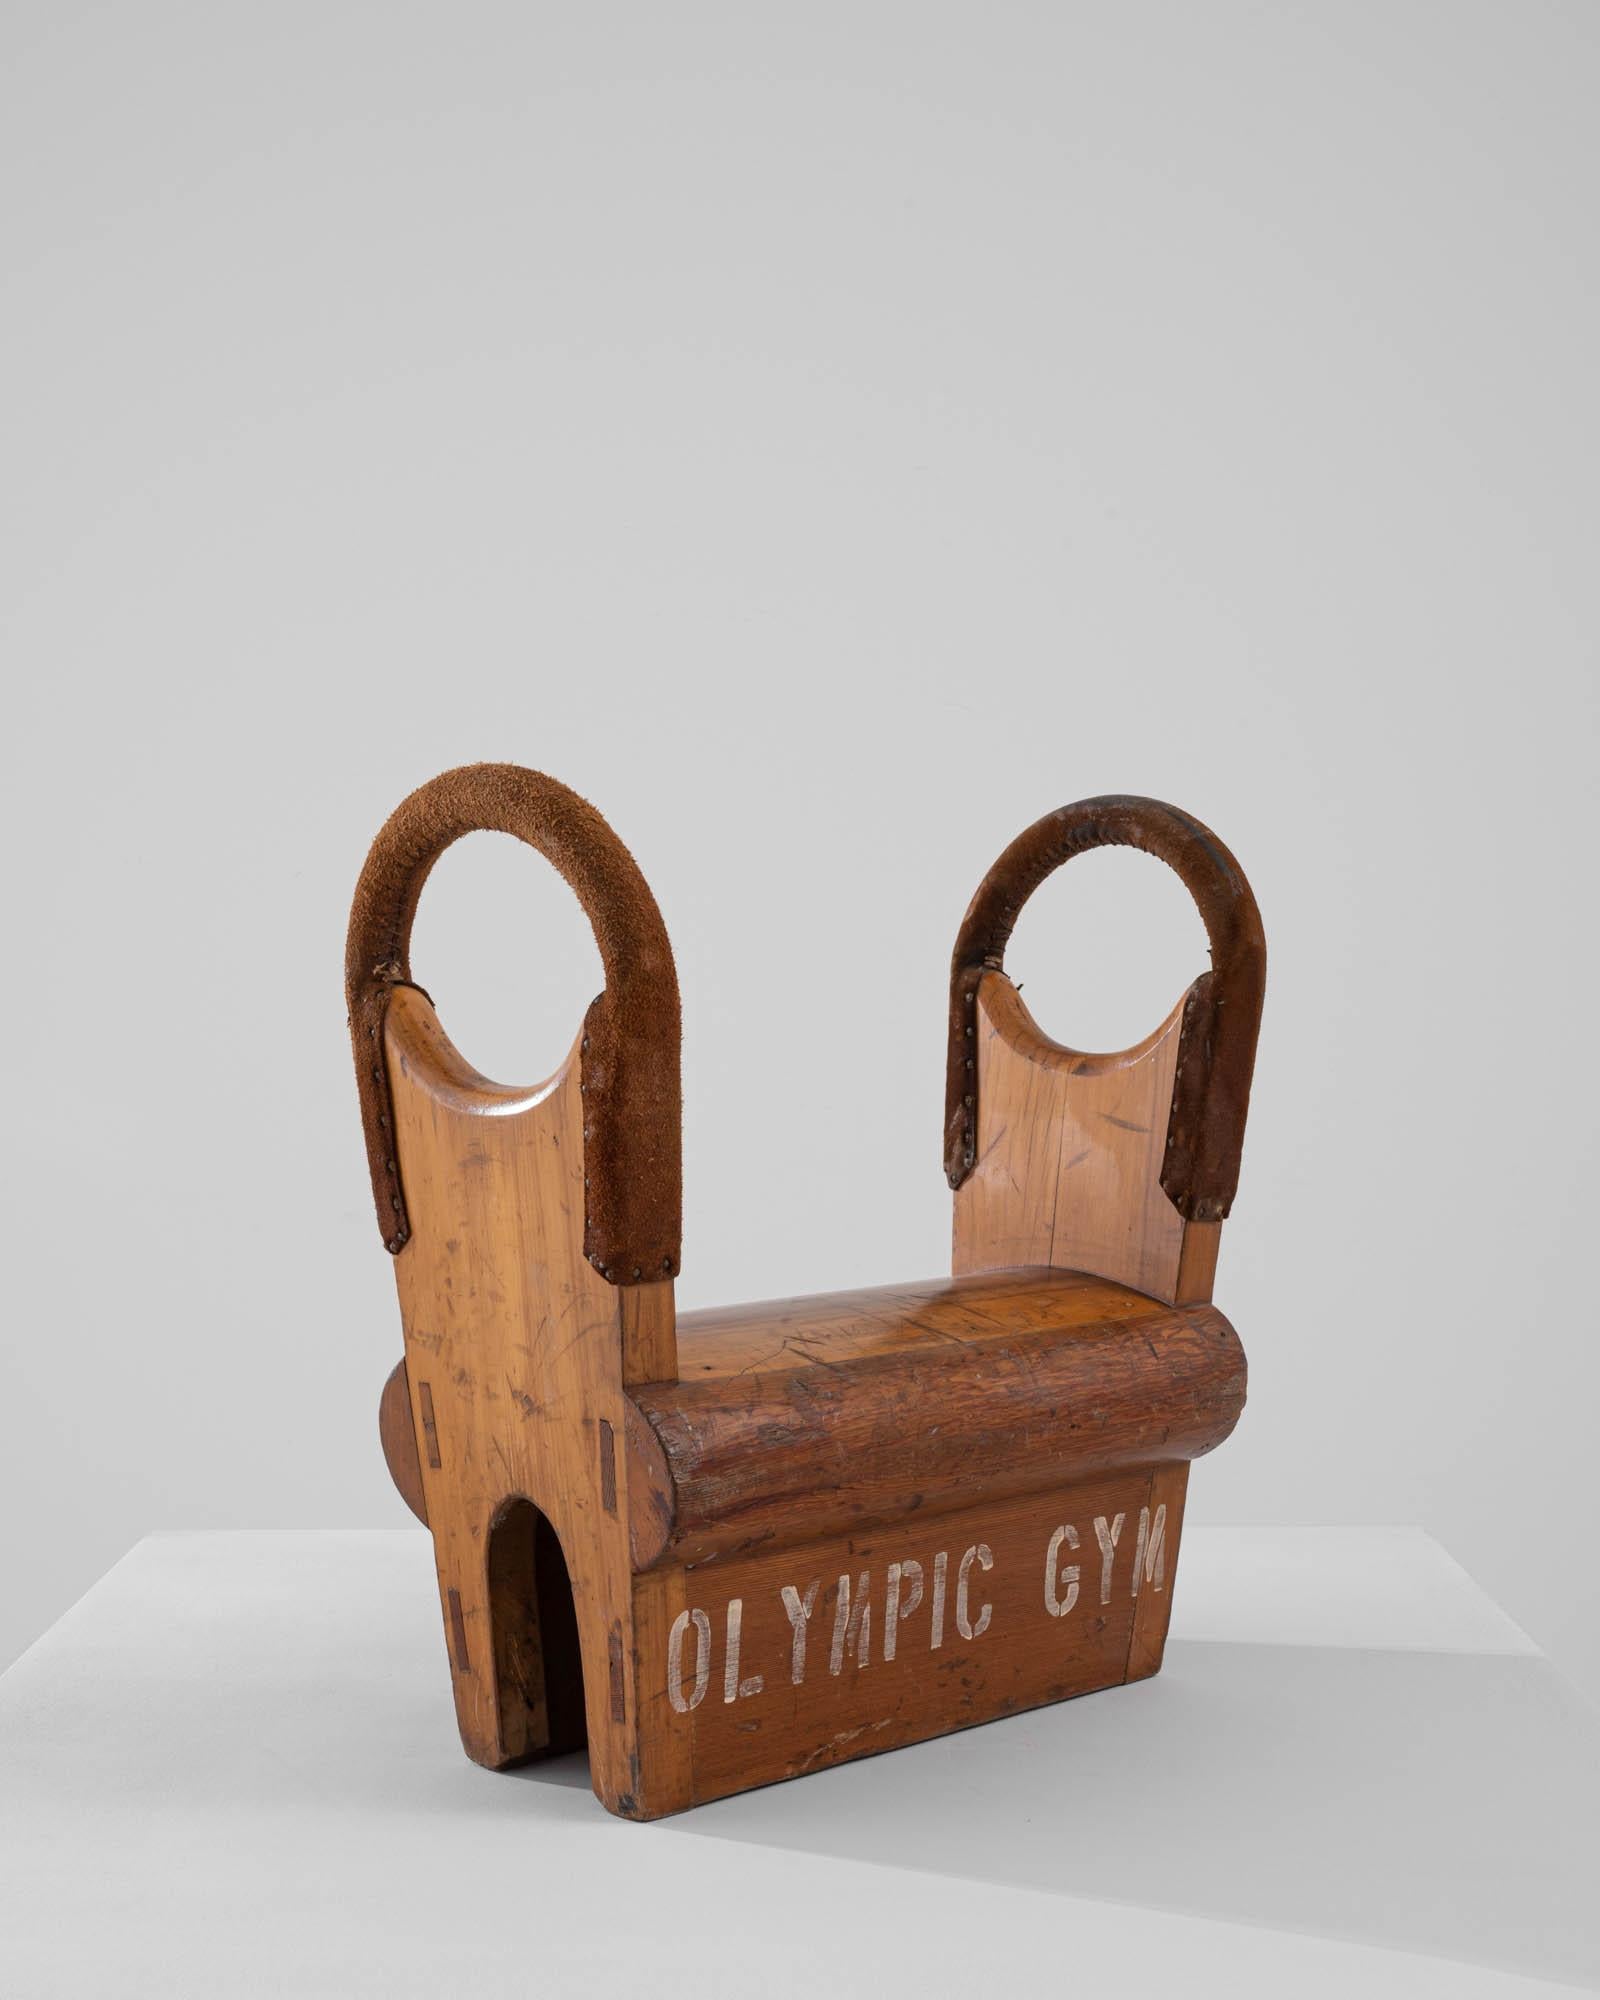 A wooden gymnastics apparatus created in 20th century Belgium. Originally created to assist in calisthenic exercises, this bench is well served by its heavy construction and sturdy base. Originally manufactured in Belgium, yet used at the Olympic